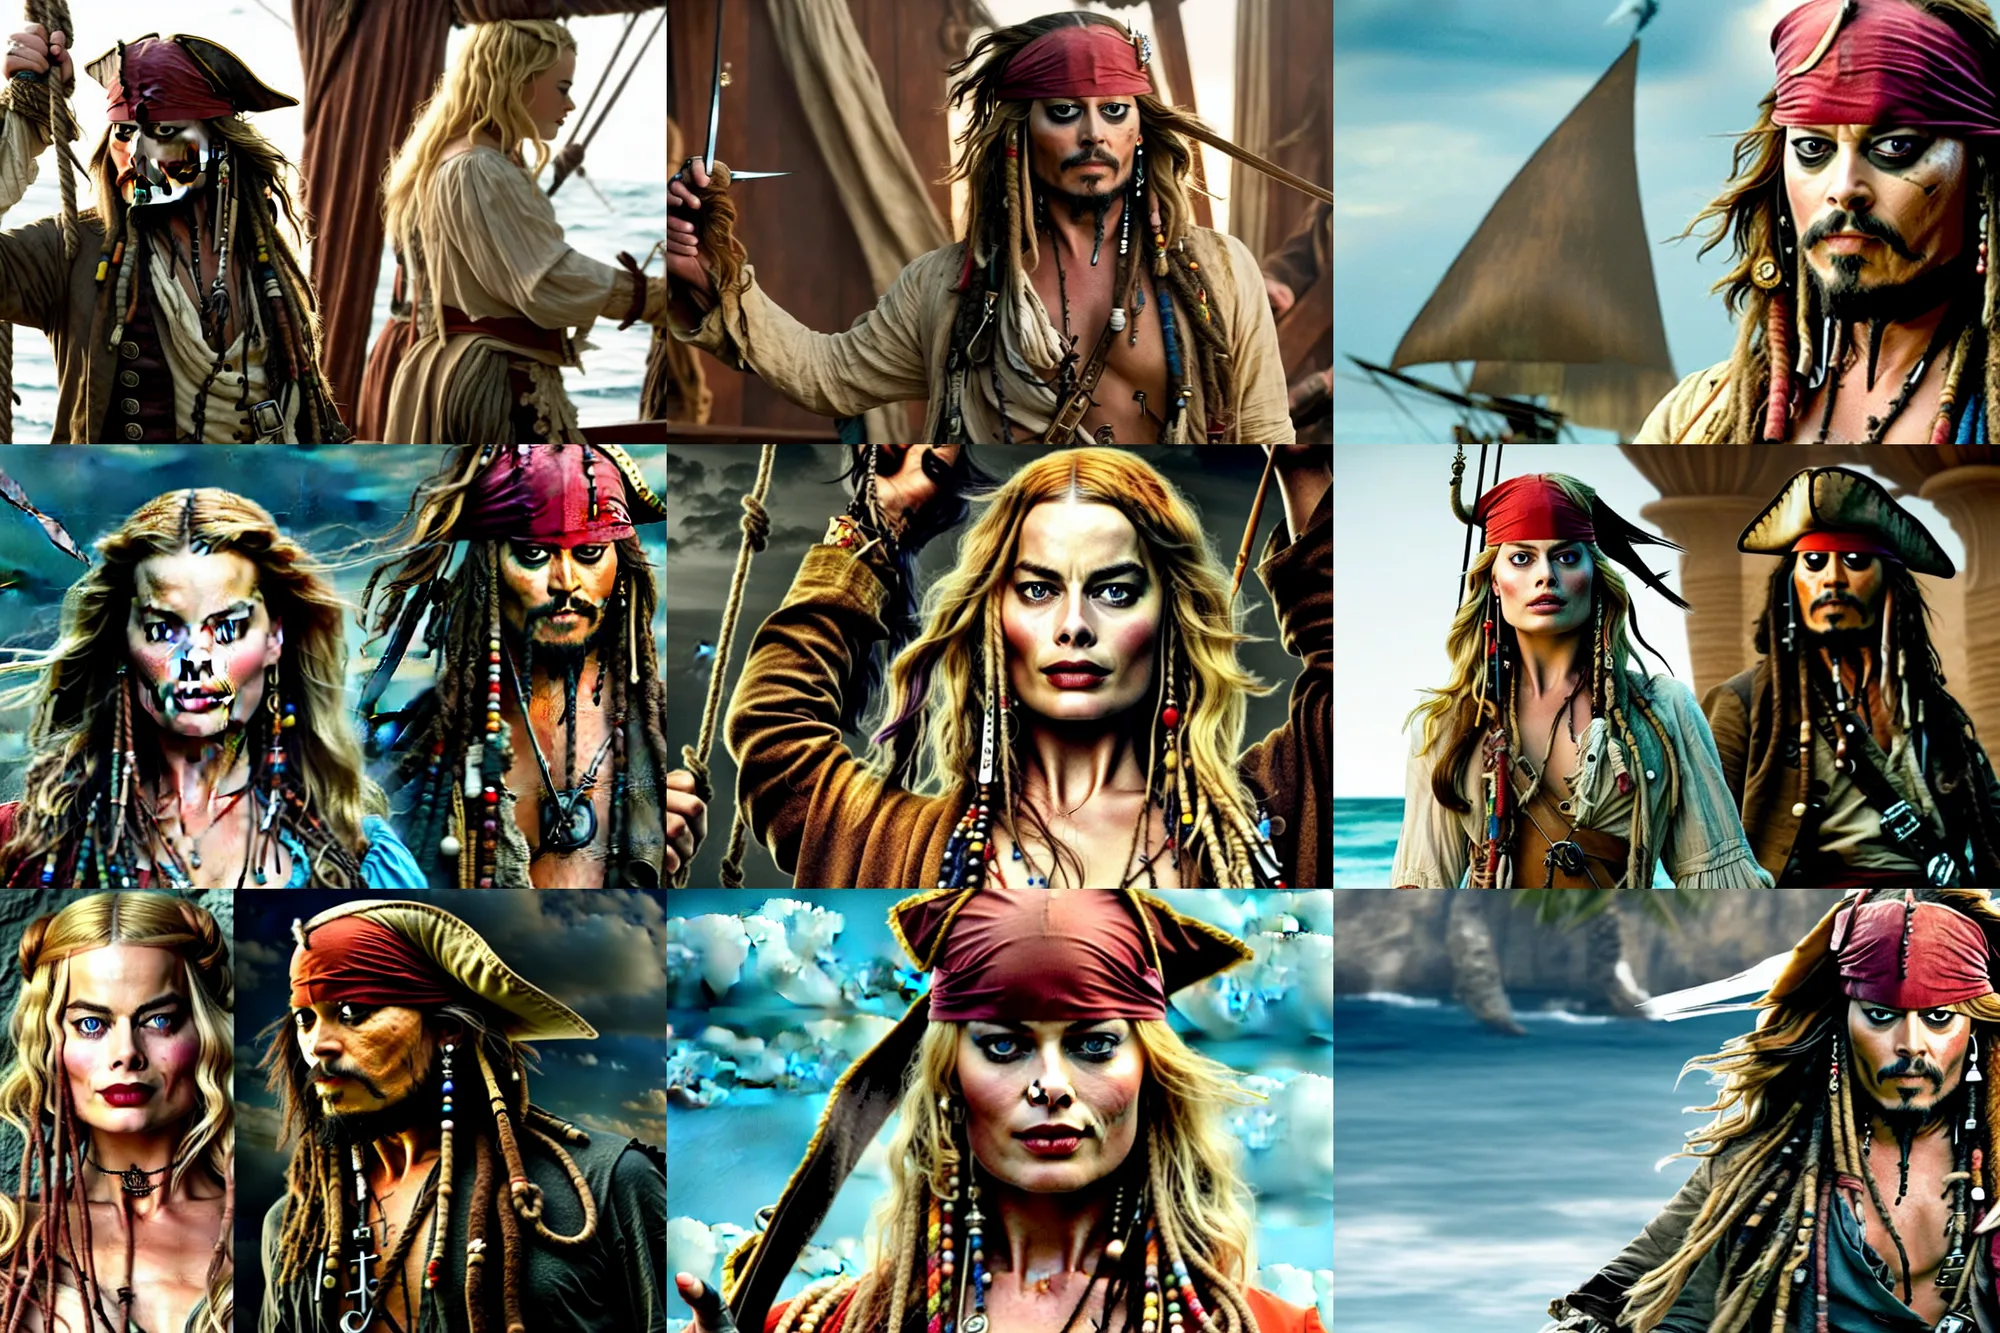 Prompt: margot robbie playing jack sparrow in the next pirates of the caribbean movie, movie still